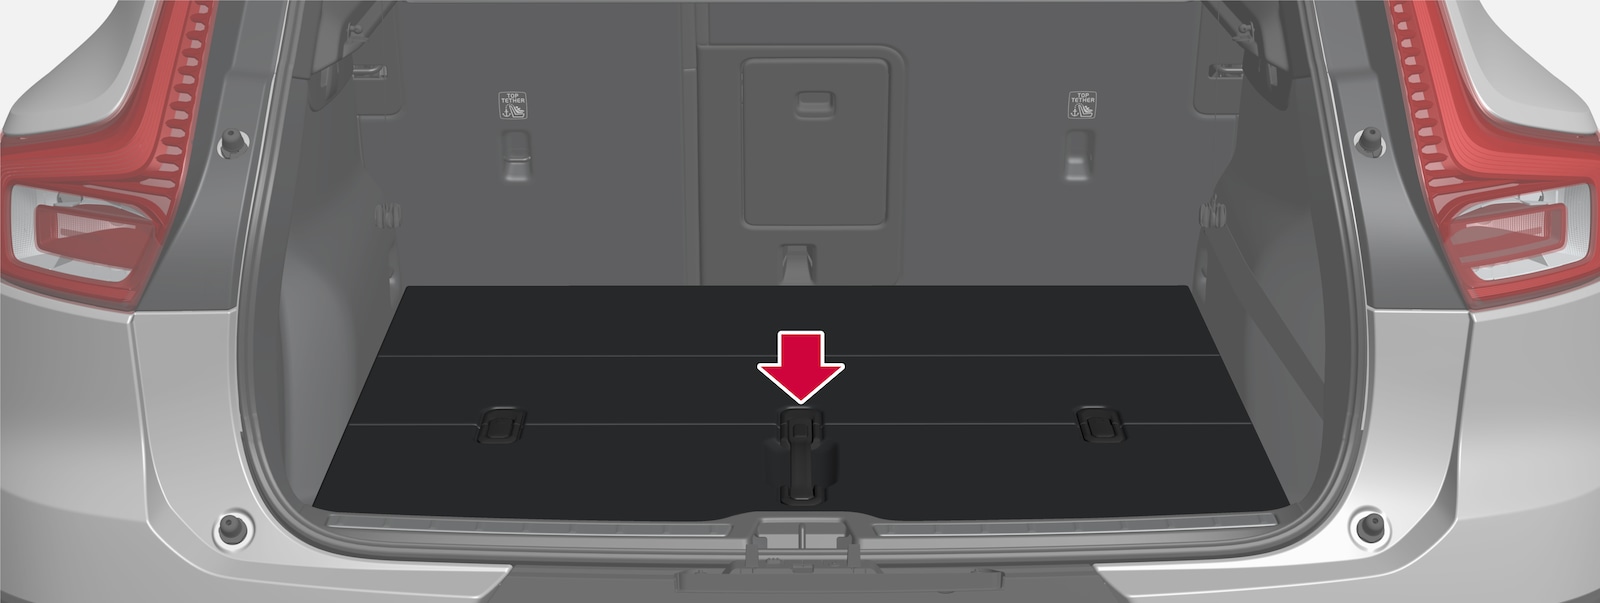 iCup-2246-XC40BEV-Luggage storage overview